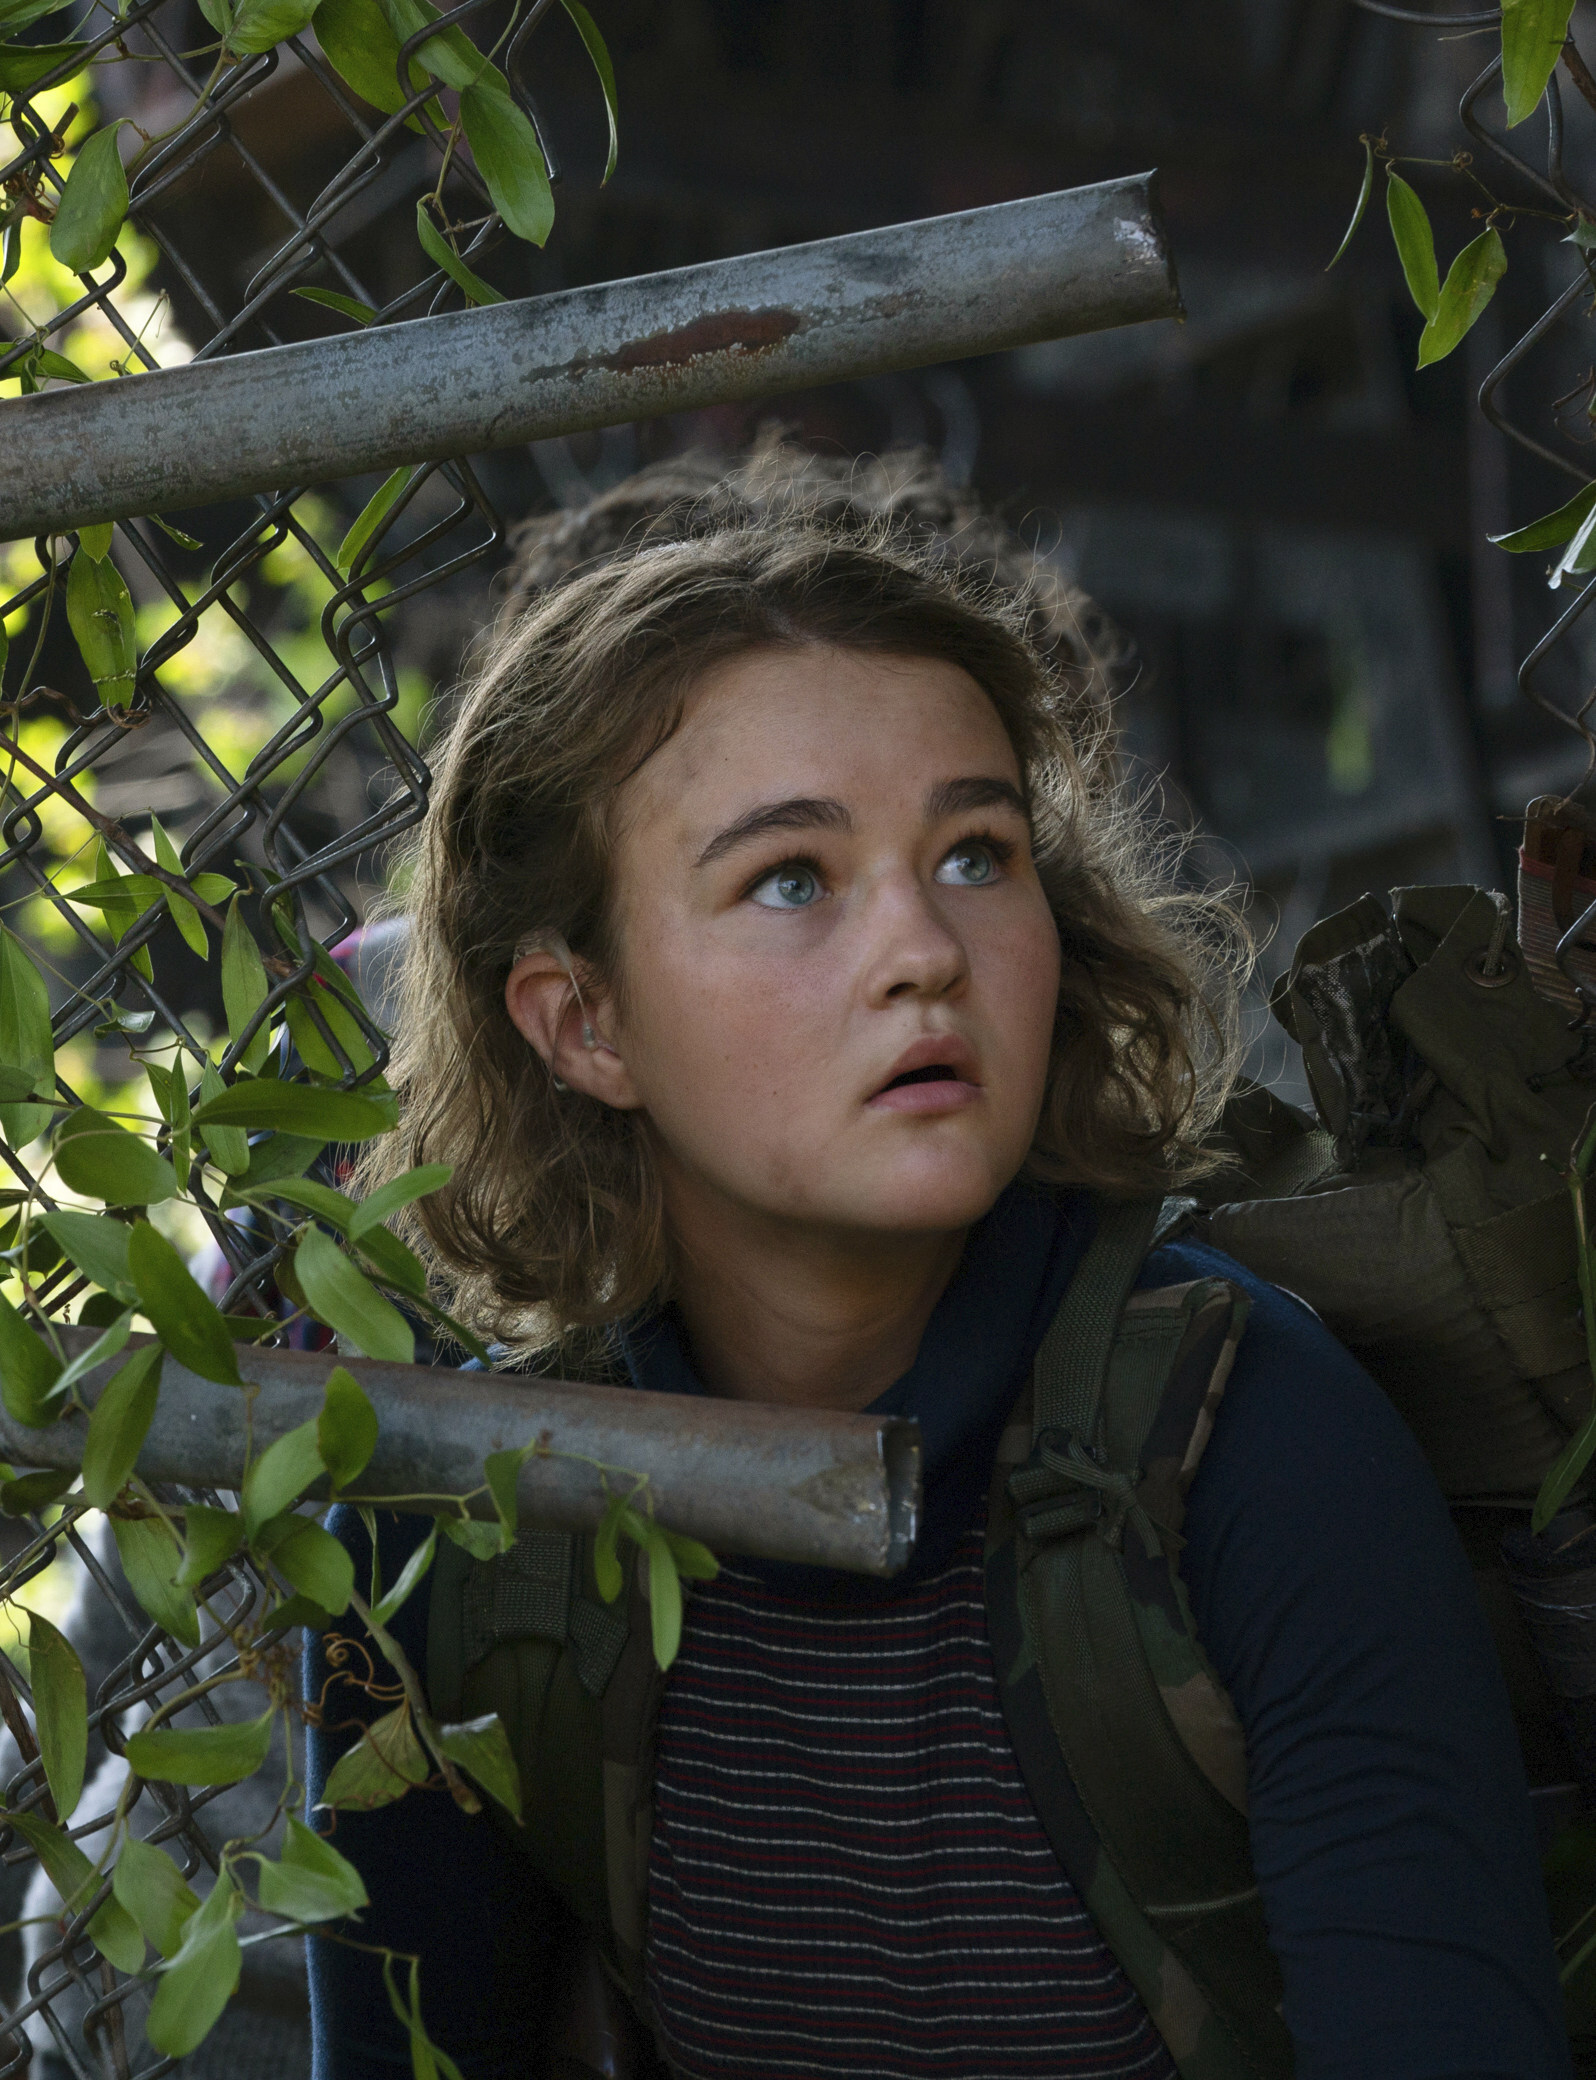 This image released by Paramount Pictures shows Millicent Simmonds in a scene from “A Quiet Place Part II.” (Jonny Cournoyer/Paramount Pictures via AP)